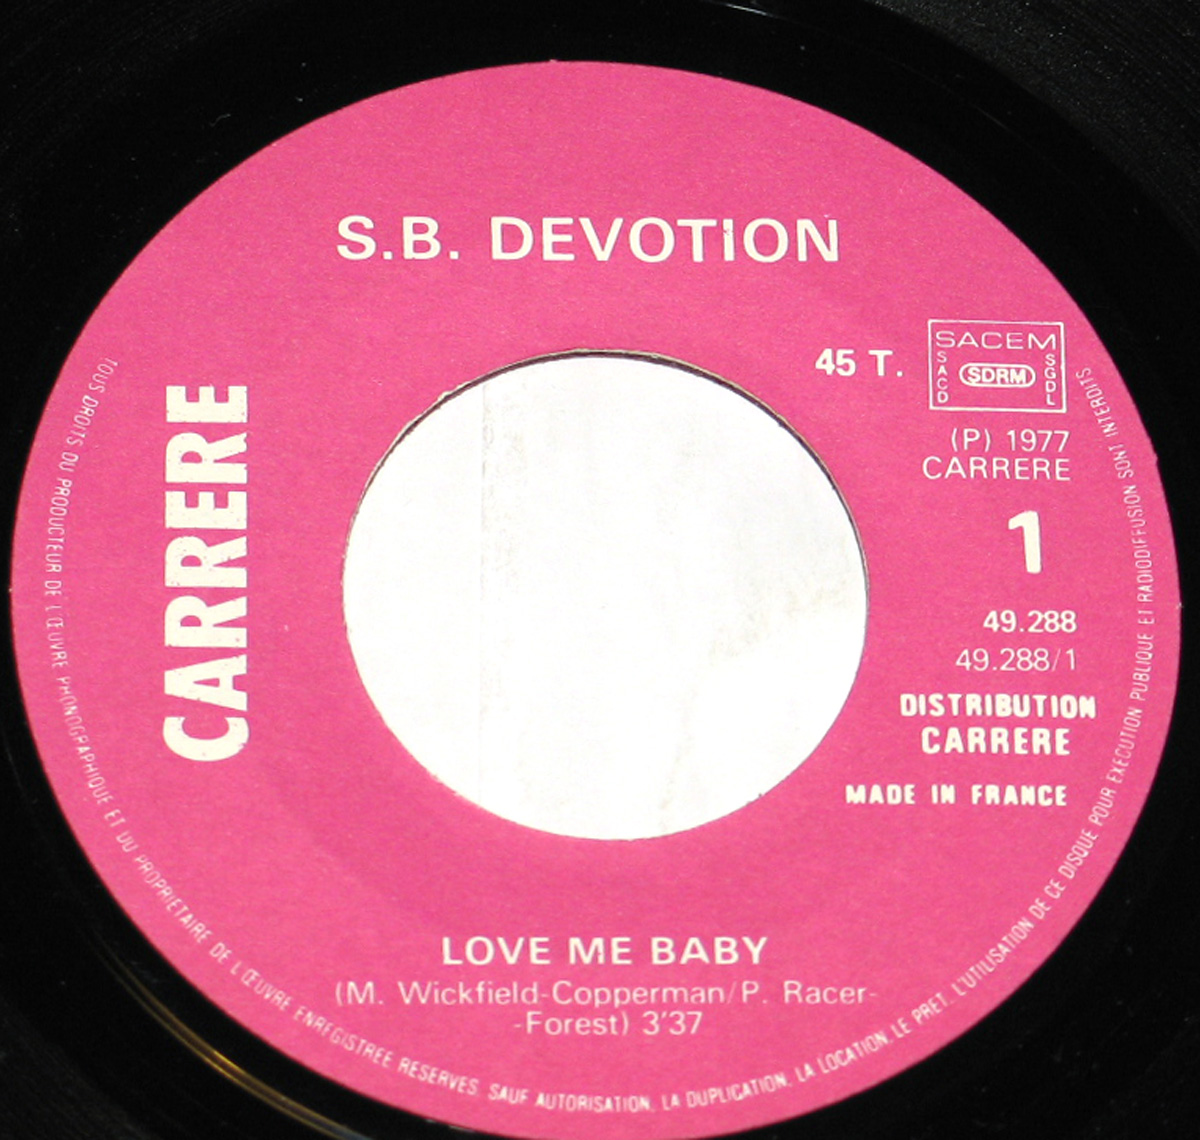 Large Hires Photo of Sheila B. Devotion Love Me Baby Carrere Records